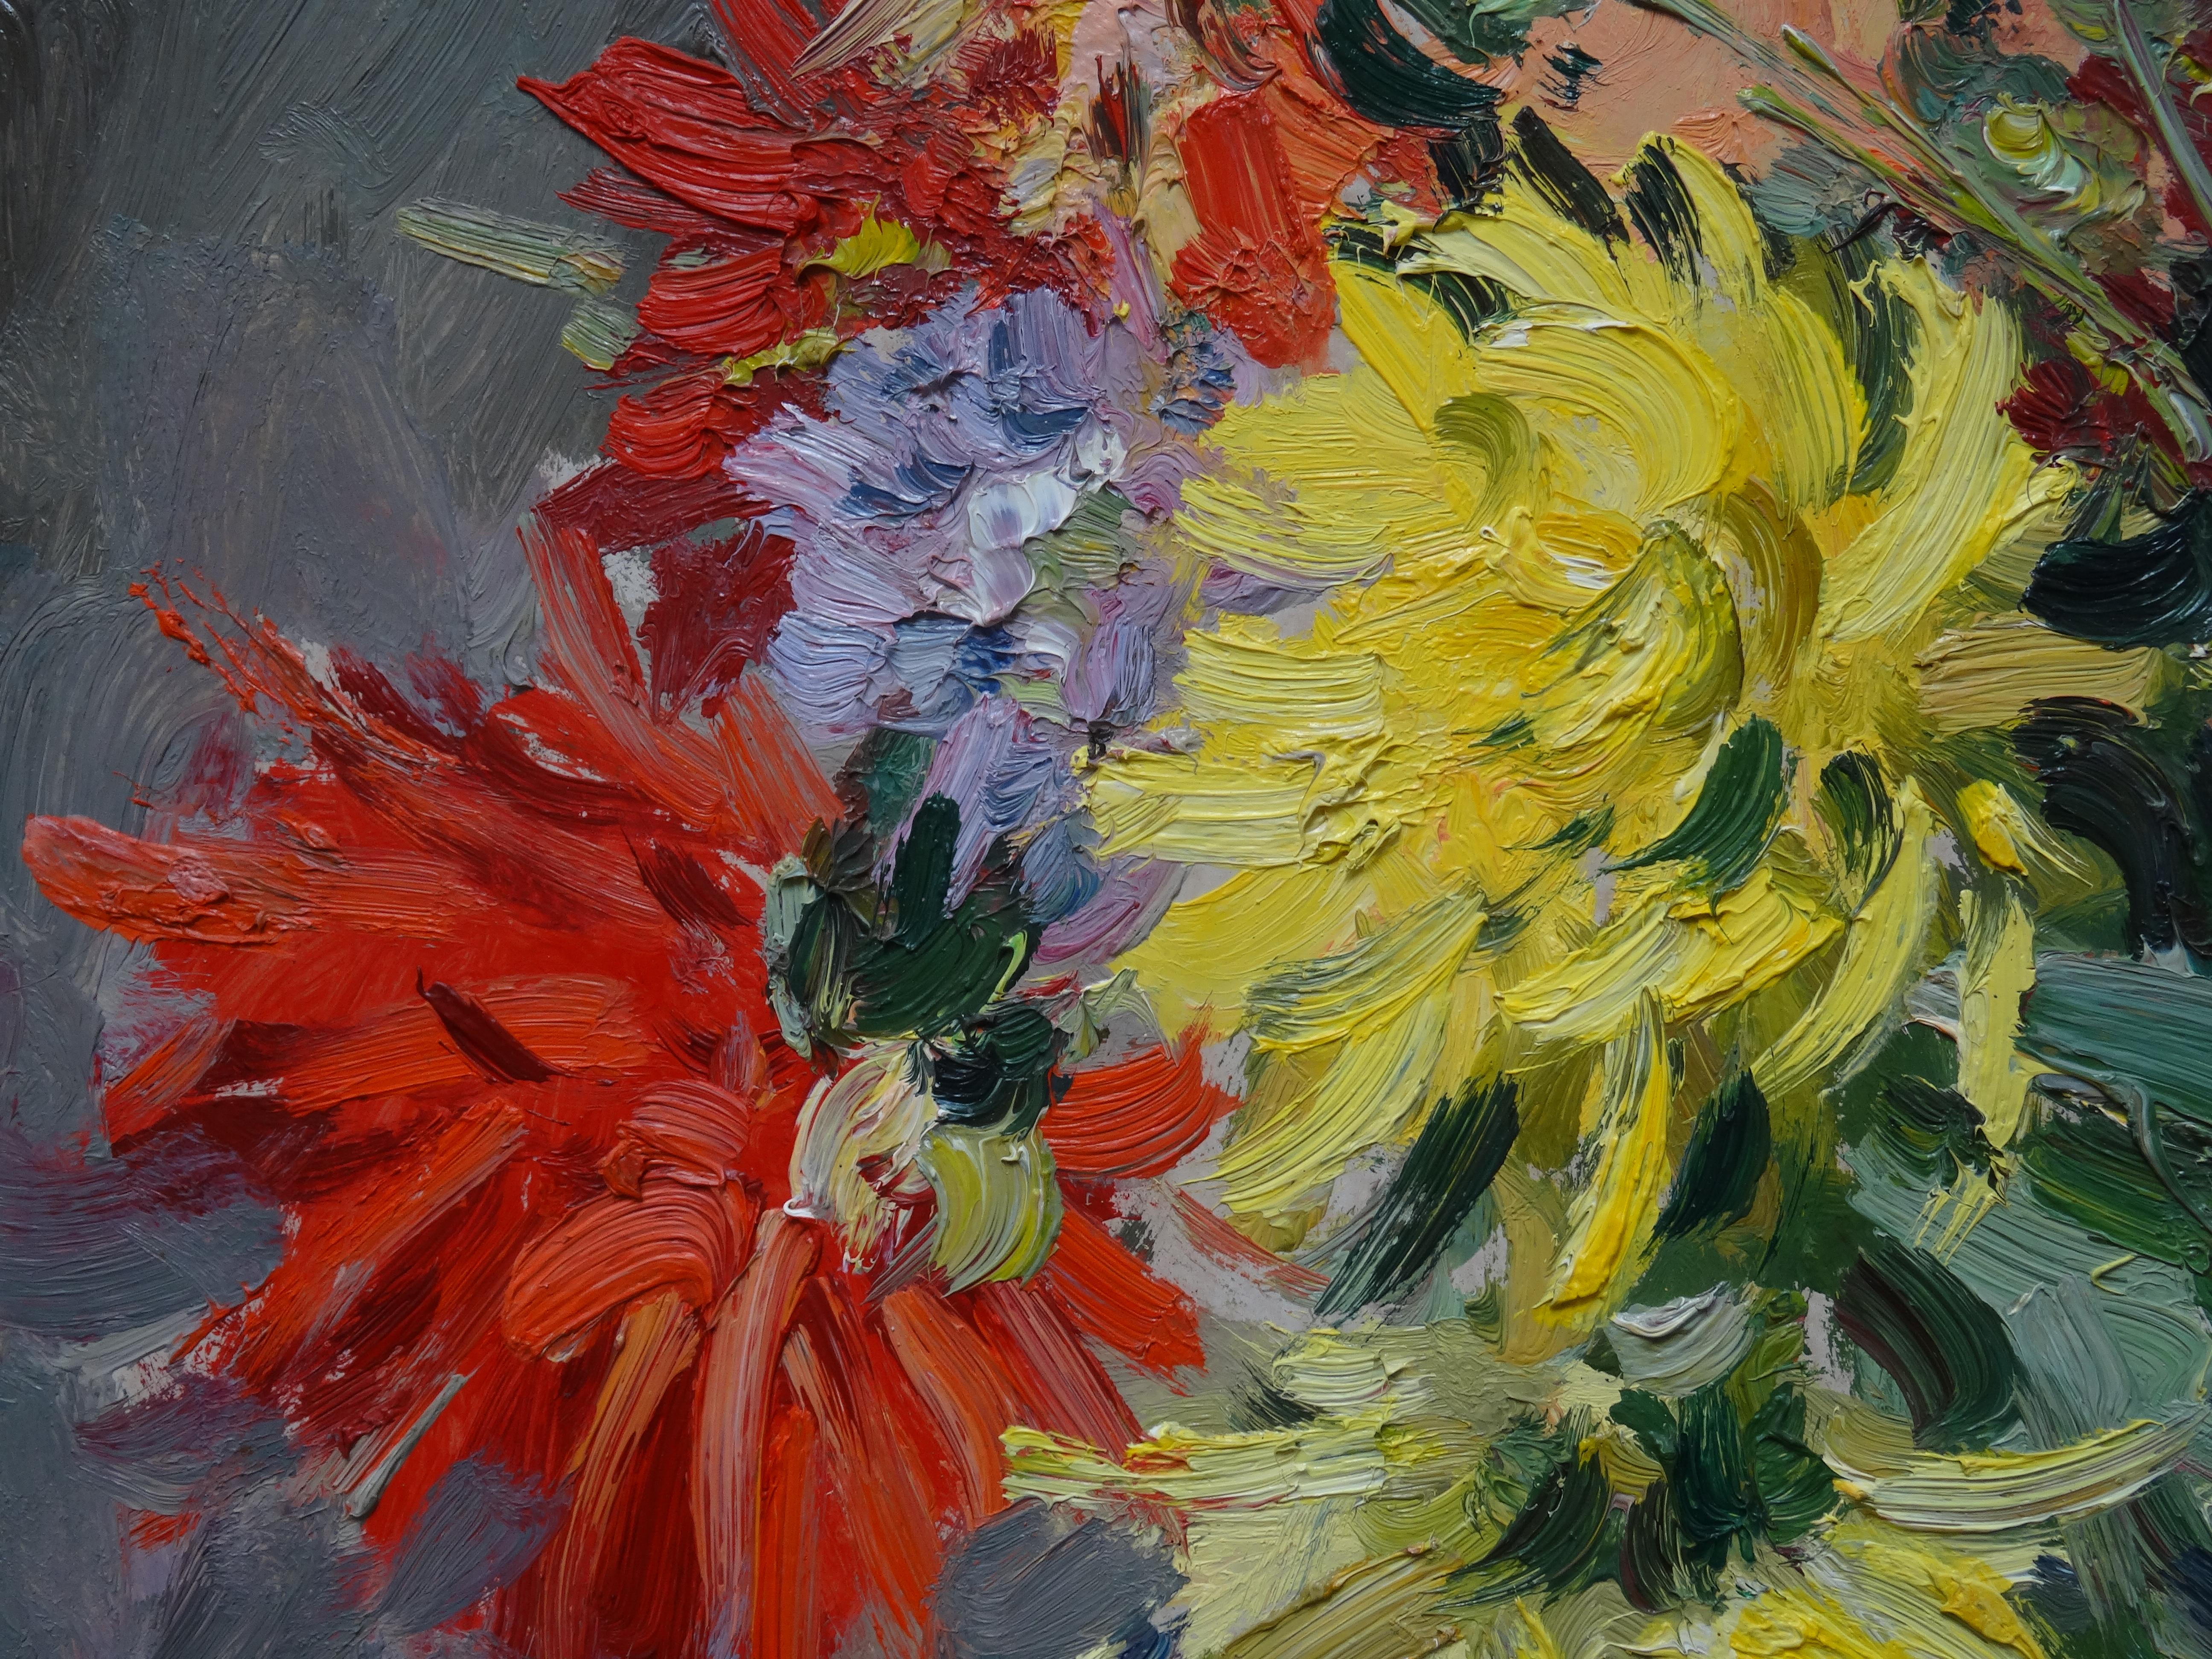 Dahlias. 1985. Oil on canvas, 48x67 cm
Composition with bright colorful flowers in a vase